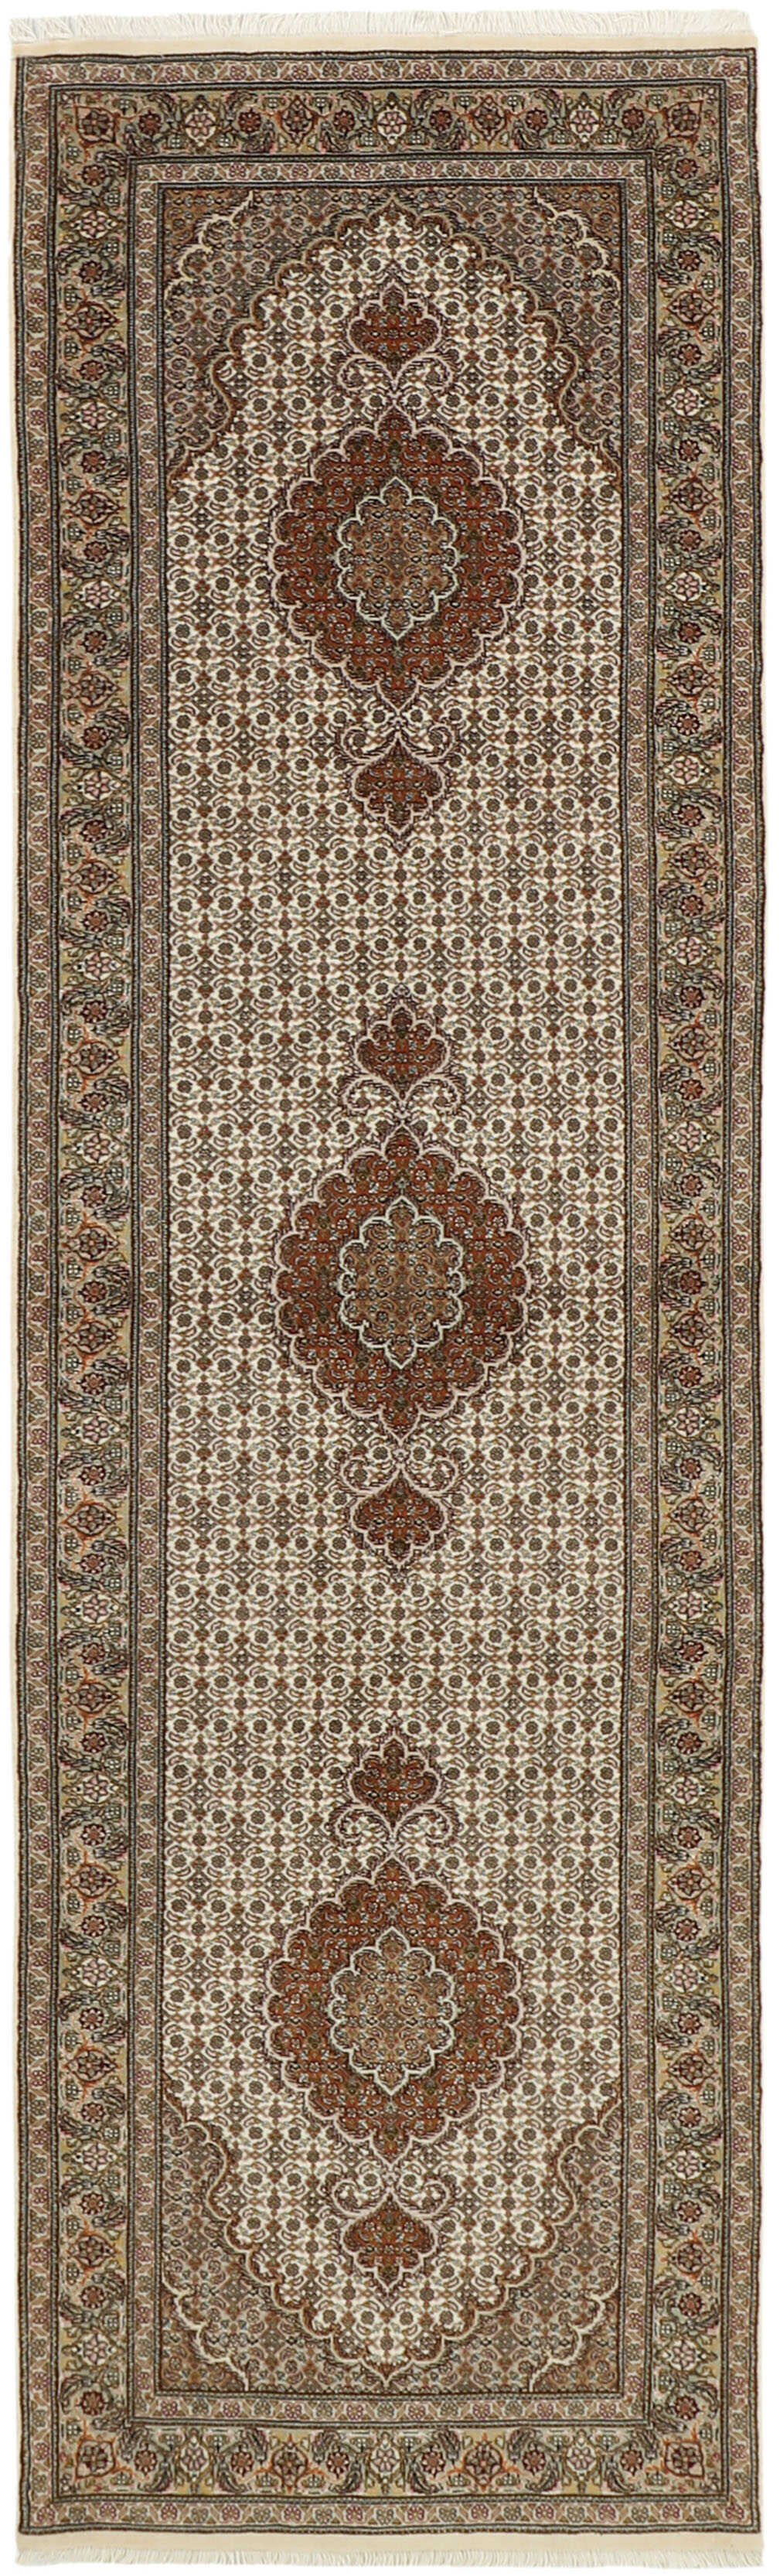 Authentic persian runner with traditional floral design in red, beige and cream